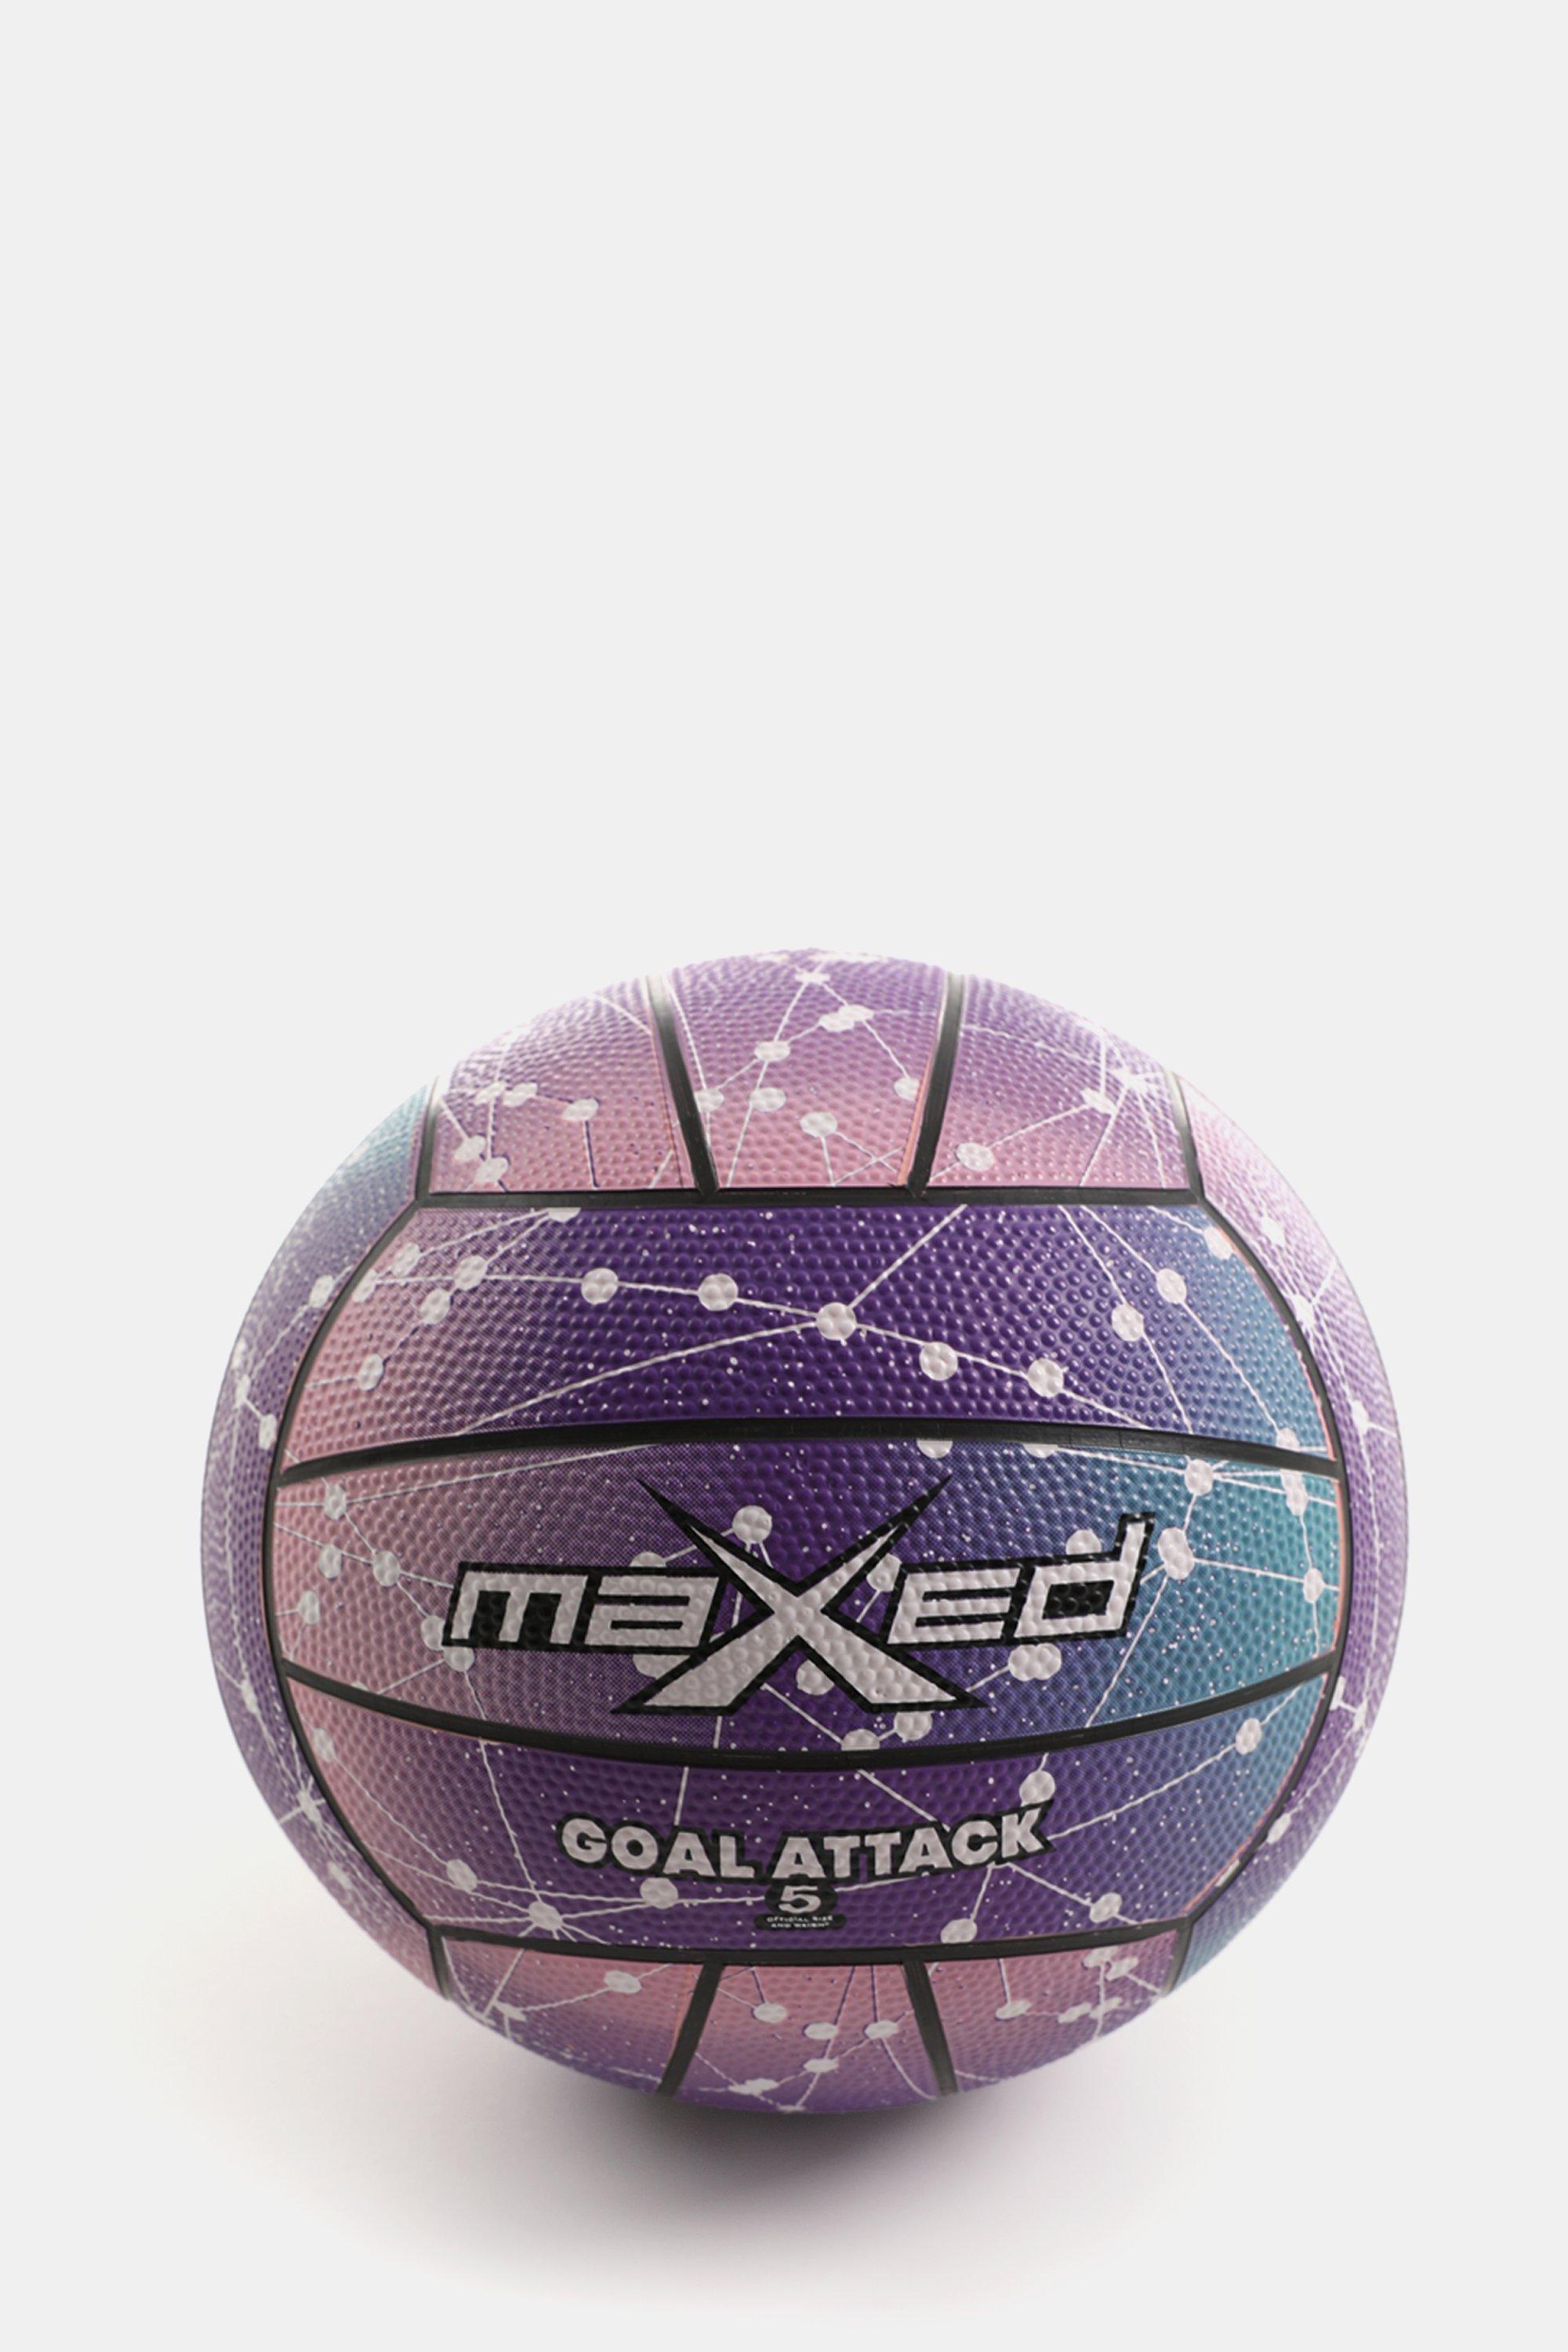 Mr Price Sport - All the netball goals right here.